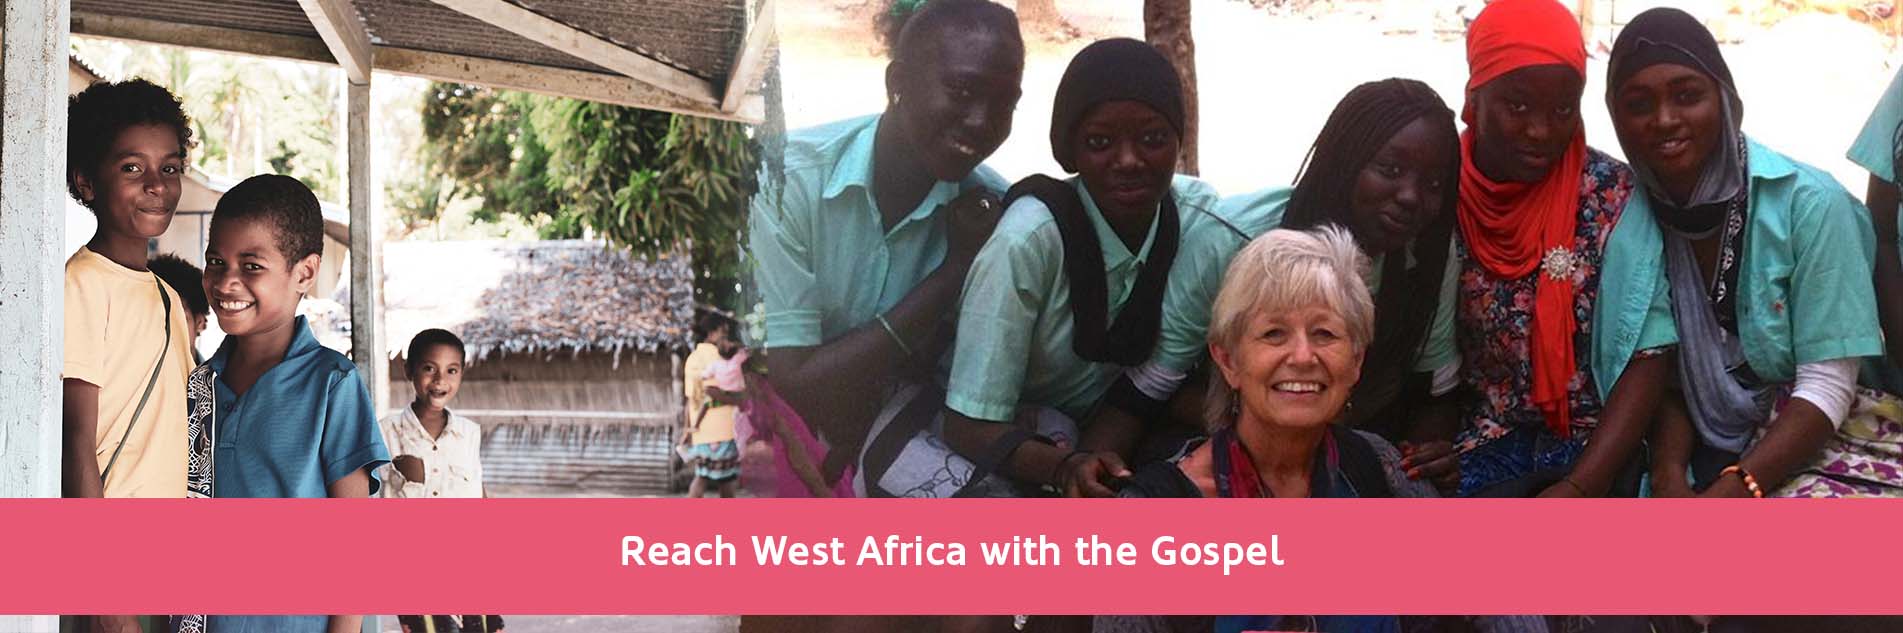 Photo Banner of a group of girls and Judy Bowler smiling (right), and three boys smiling at the camera (left), with a headline of "Reach West Africa with the gospel."